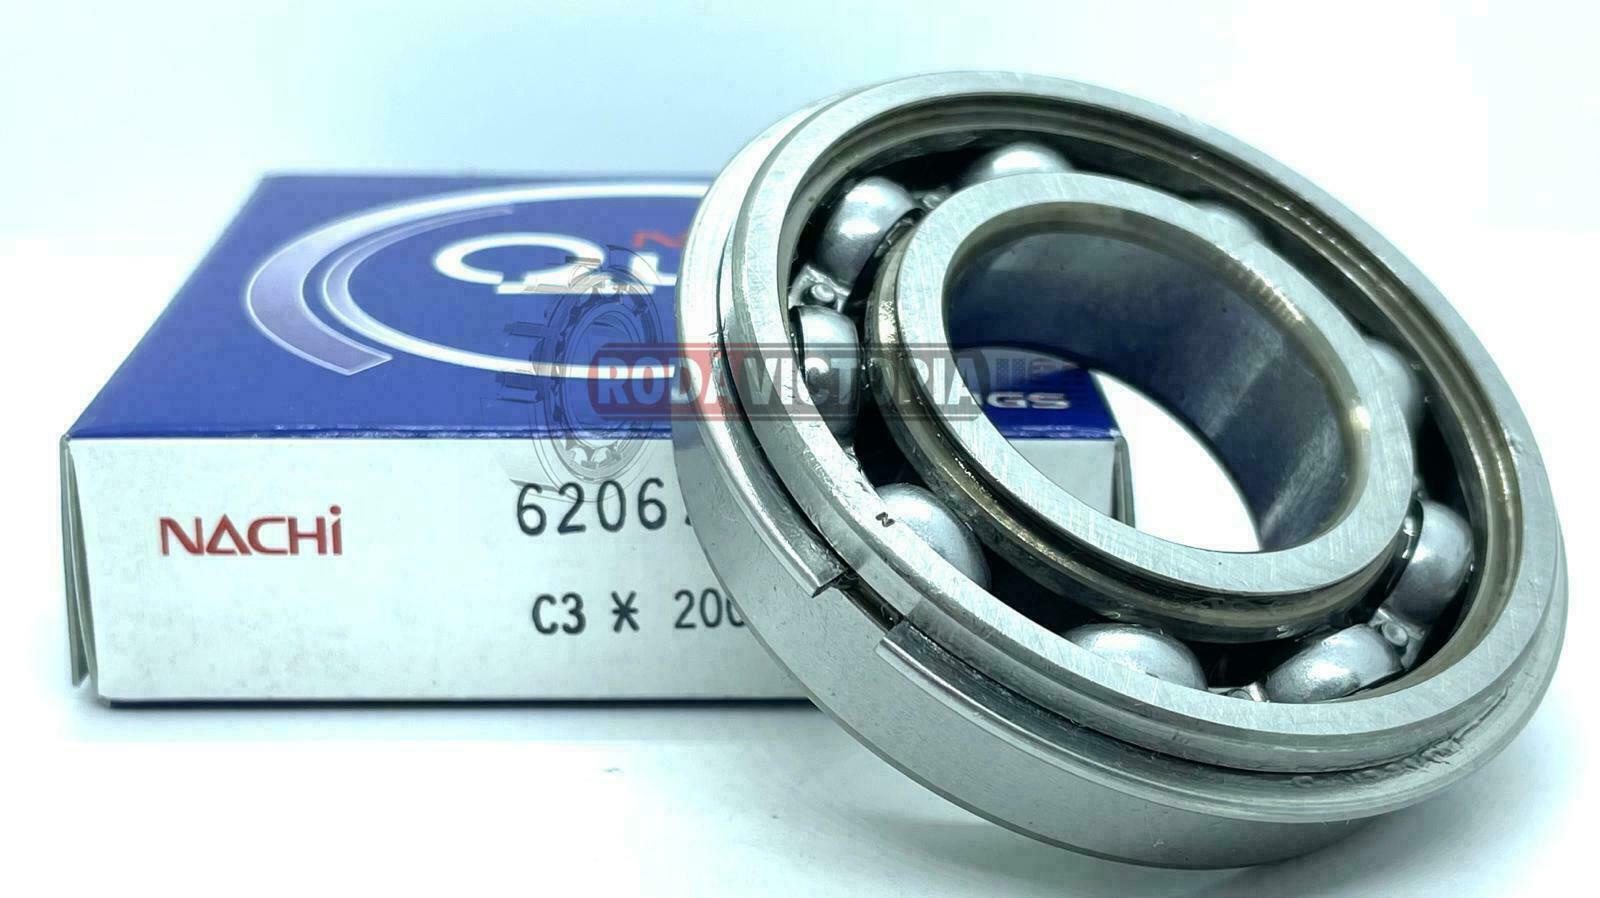 Nachi bearings are high-quality and reliable components used in various industries. One popular model is the 6206 bearing, which is compatible with Billet Crankshaft main Bearing applications. With part number Billet Crankshaft main Bearing, 6206, Part# 91-5731